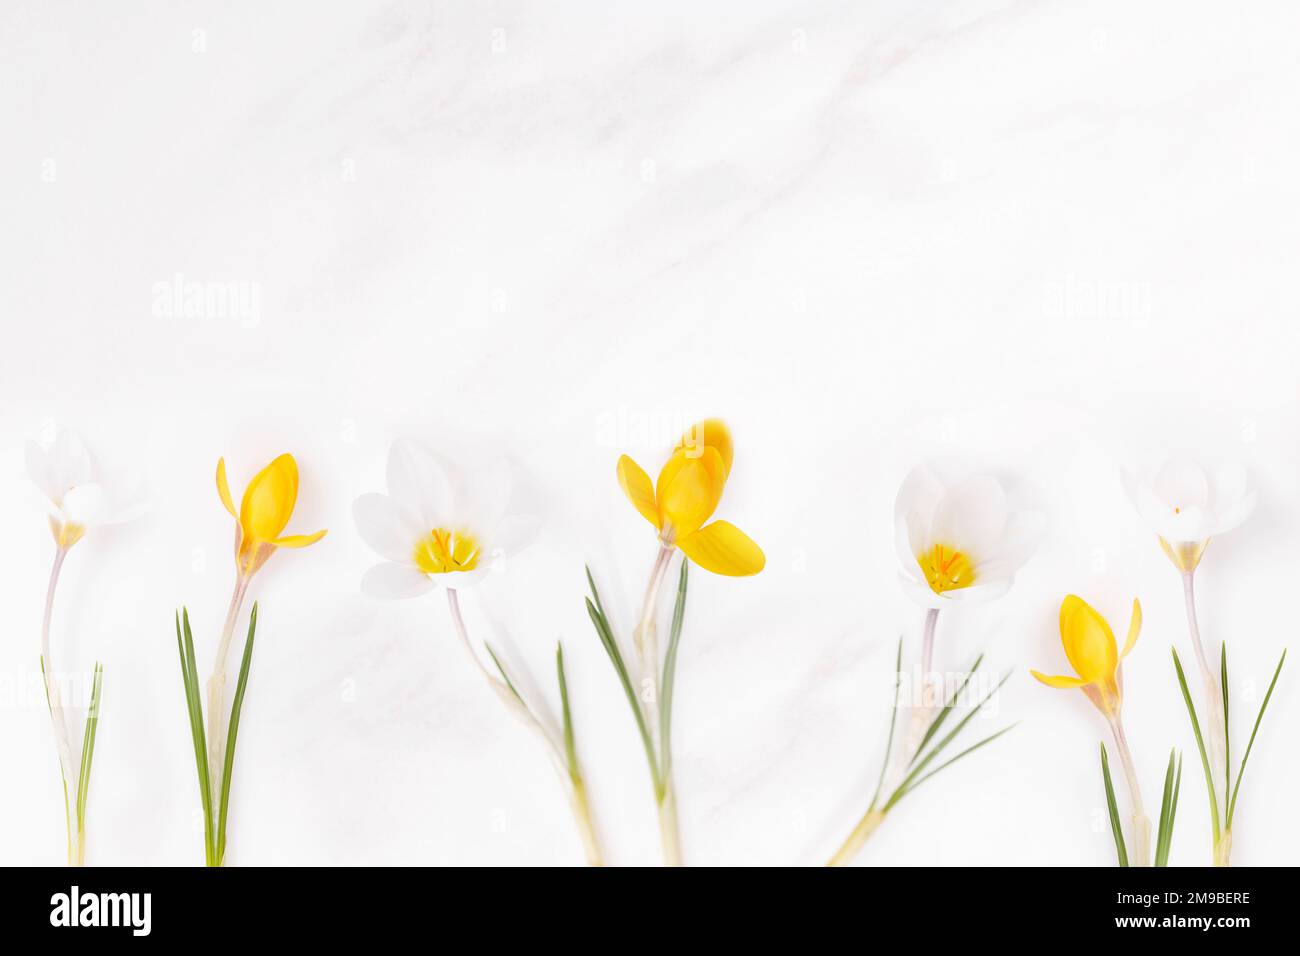 Flowers composition. Yellow and white flowers crocus on white marble background. Spring, easter concept. Flat lay, Stock Photo